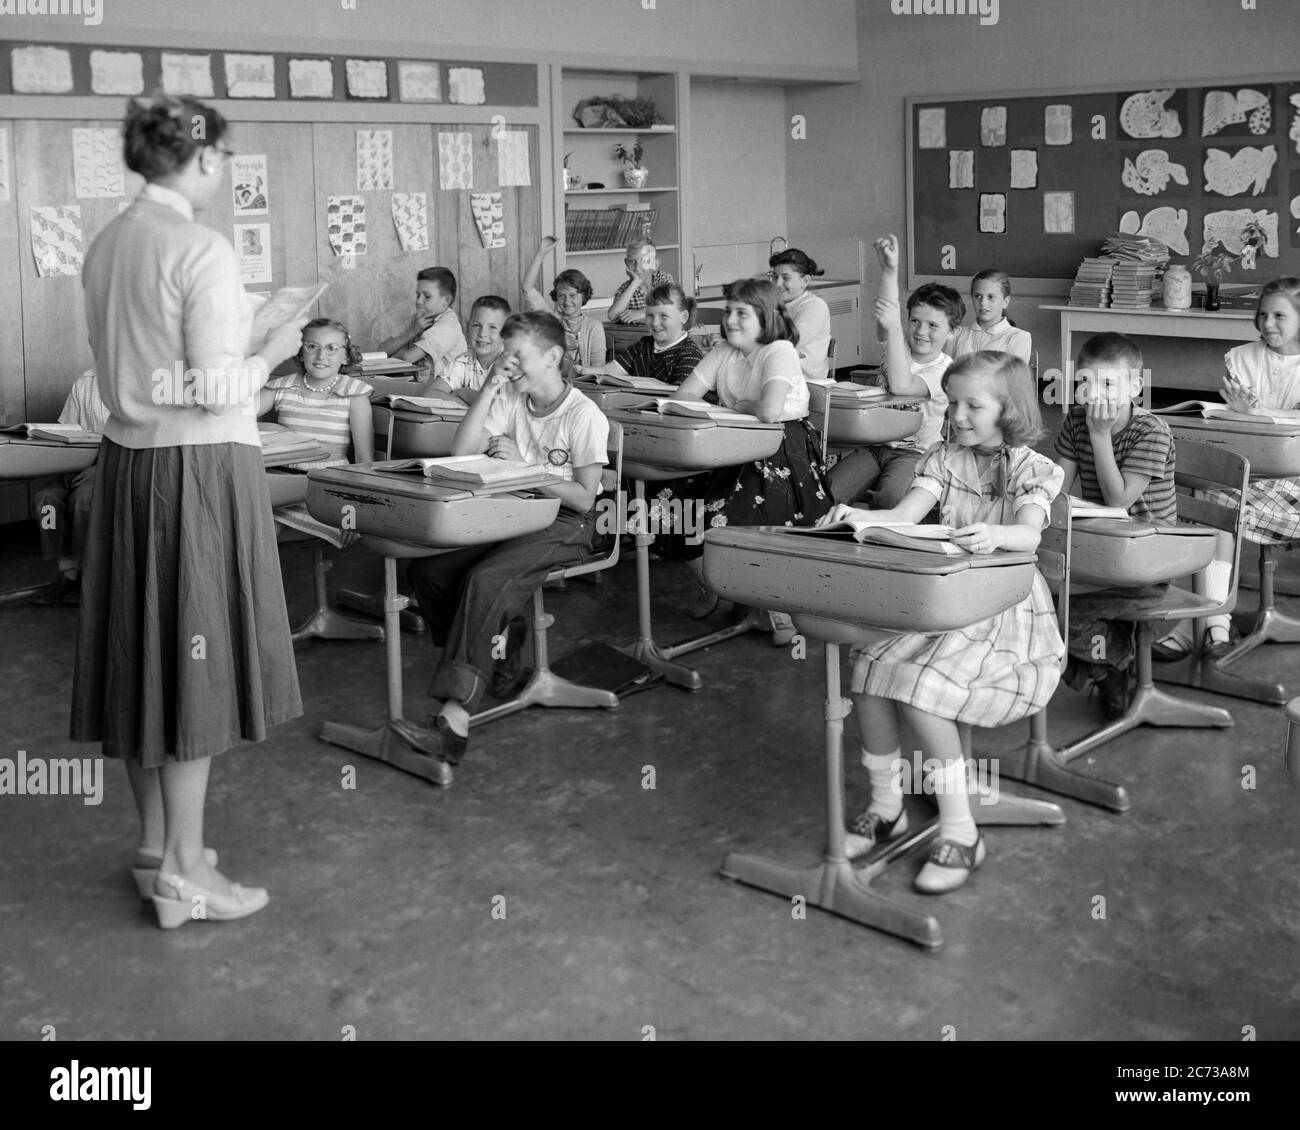 1950s 19560s CLASSROOM ELEMENTARY GRADE SCHOOL TEACHER BACK TO CAMERA STUDENTS BOYS GIRLS AT DESKS RAISED HANDS - s12002 HEL001 HARS RAISED LIFESTYLE FEMALES COPY SPACE FULL-LENGTH HALF-LENGTH LADIES PERSONS MALES RAISING B&W DESKS SCHOOLS GRADE DISCOVERY MANUAL EXCITEMENT INSTRUCTOR KNOWLEDGE OCCUPATIONS PRIMARY 1956 CONNECTION EDUCATOR COOPERATION EDUCATING EDUCATORS GRADE SCHOOL GROWTH INSTRUCTORS JUVENILES MID-ADULT MID-ADULT WOMAN PRE-TEEN PRE-TEEN BOY PRE-TEEN GIRL SCHOOL TEACHES TOGETHERNESS BLACK AND WHITE CAUCASIAN ETHNICITY OLD FASHIONED Stock Photo